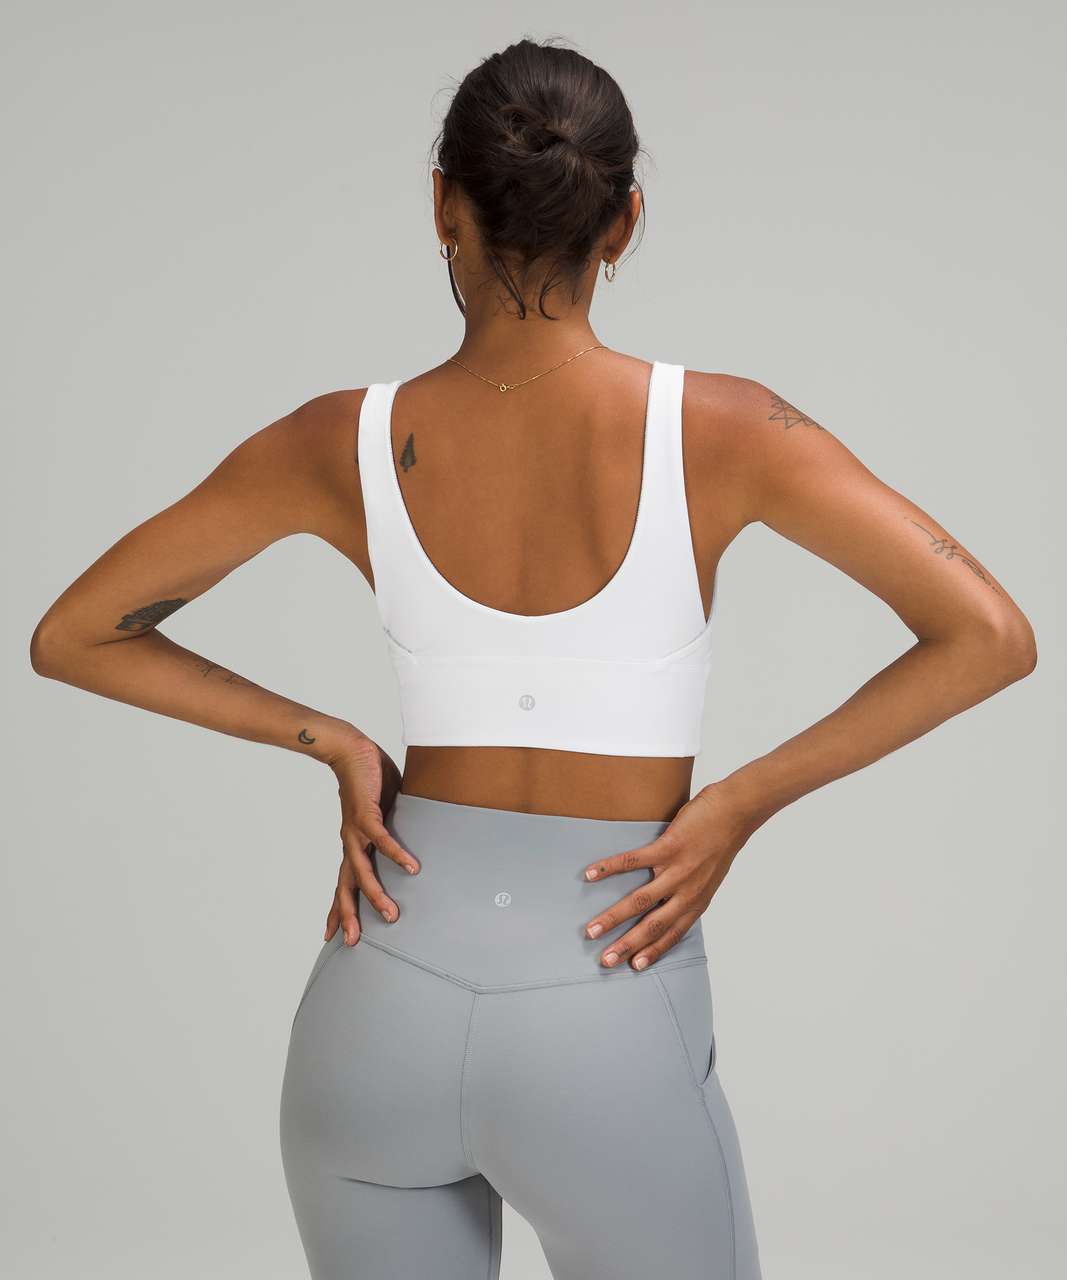 Lululemon Align Reversible Bra *Light Support, A/B Cups - White / Wee Are From Space Nimbus Battleship